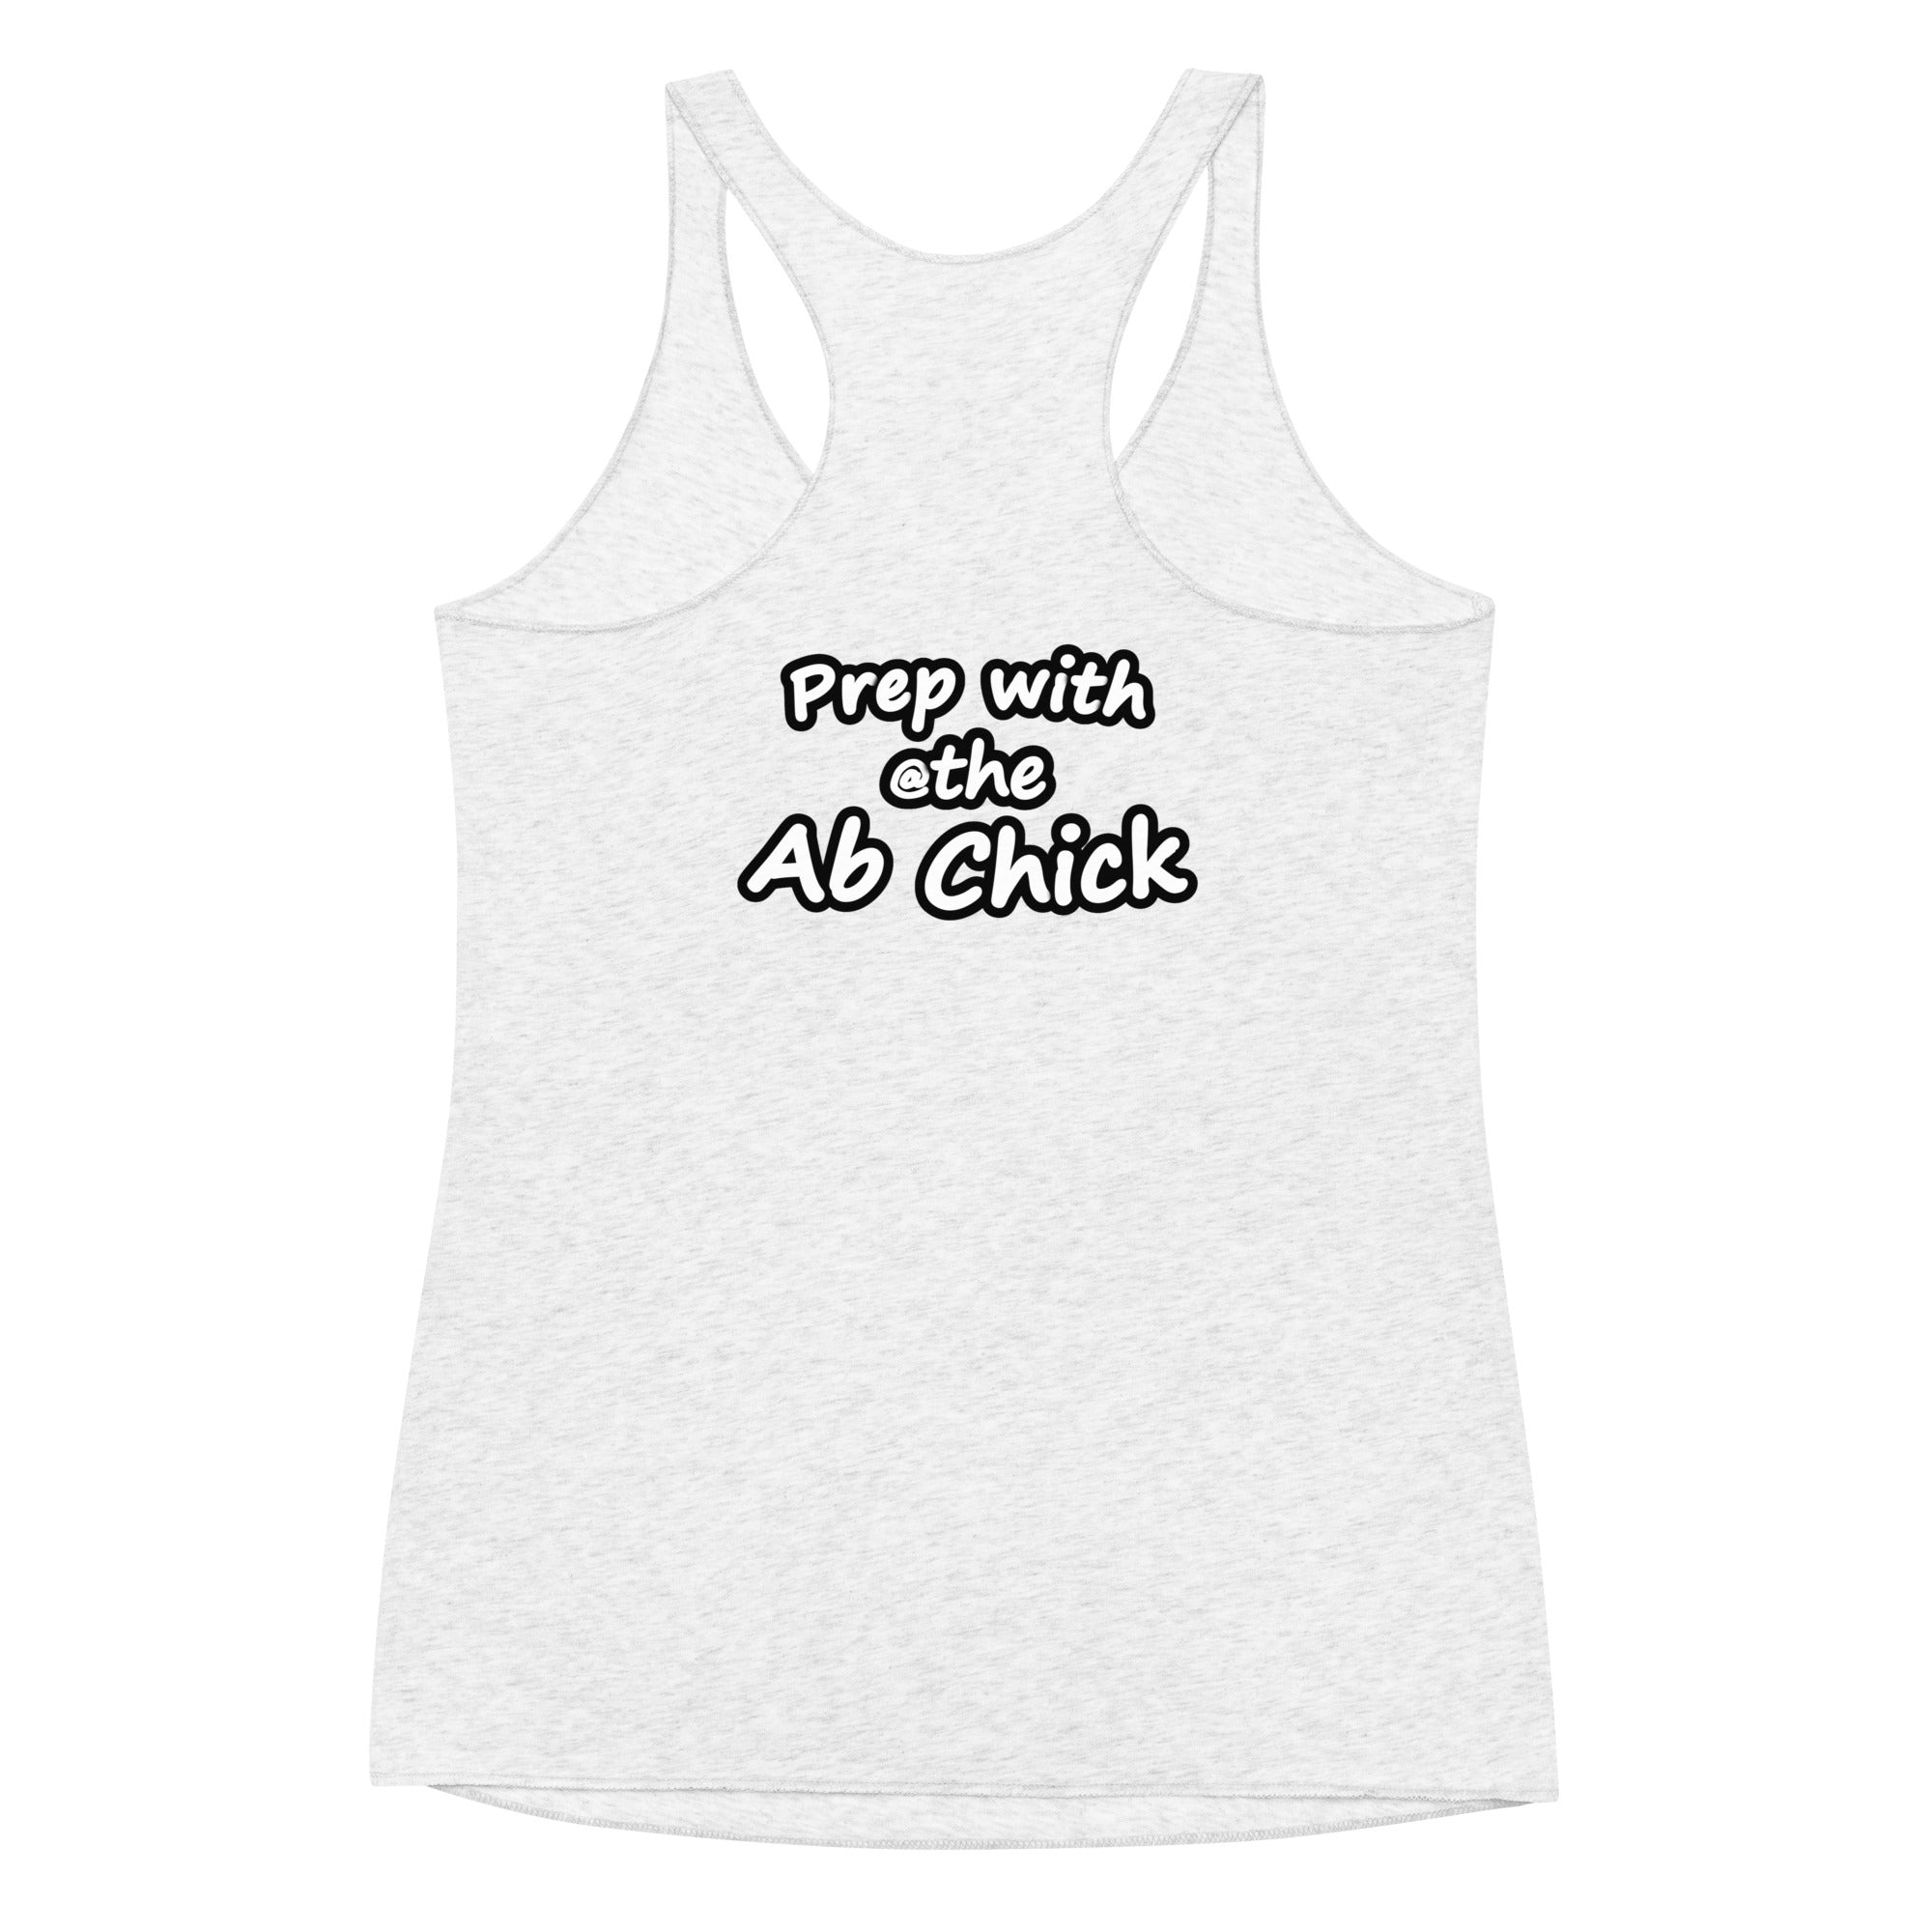 PREP with The Ab Chick Women's Racerback Tank Chick